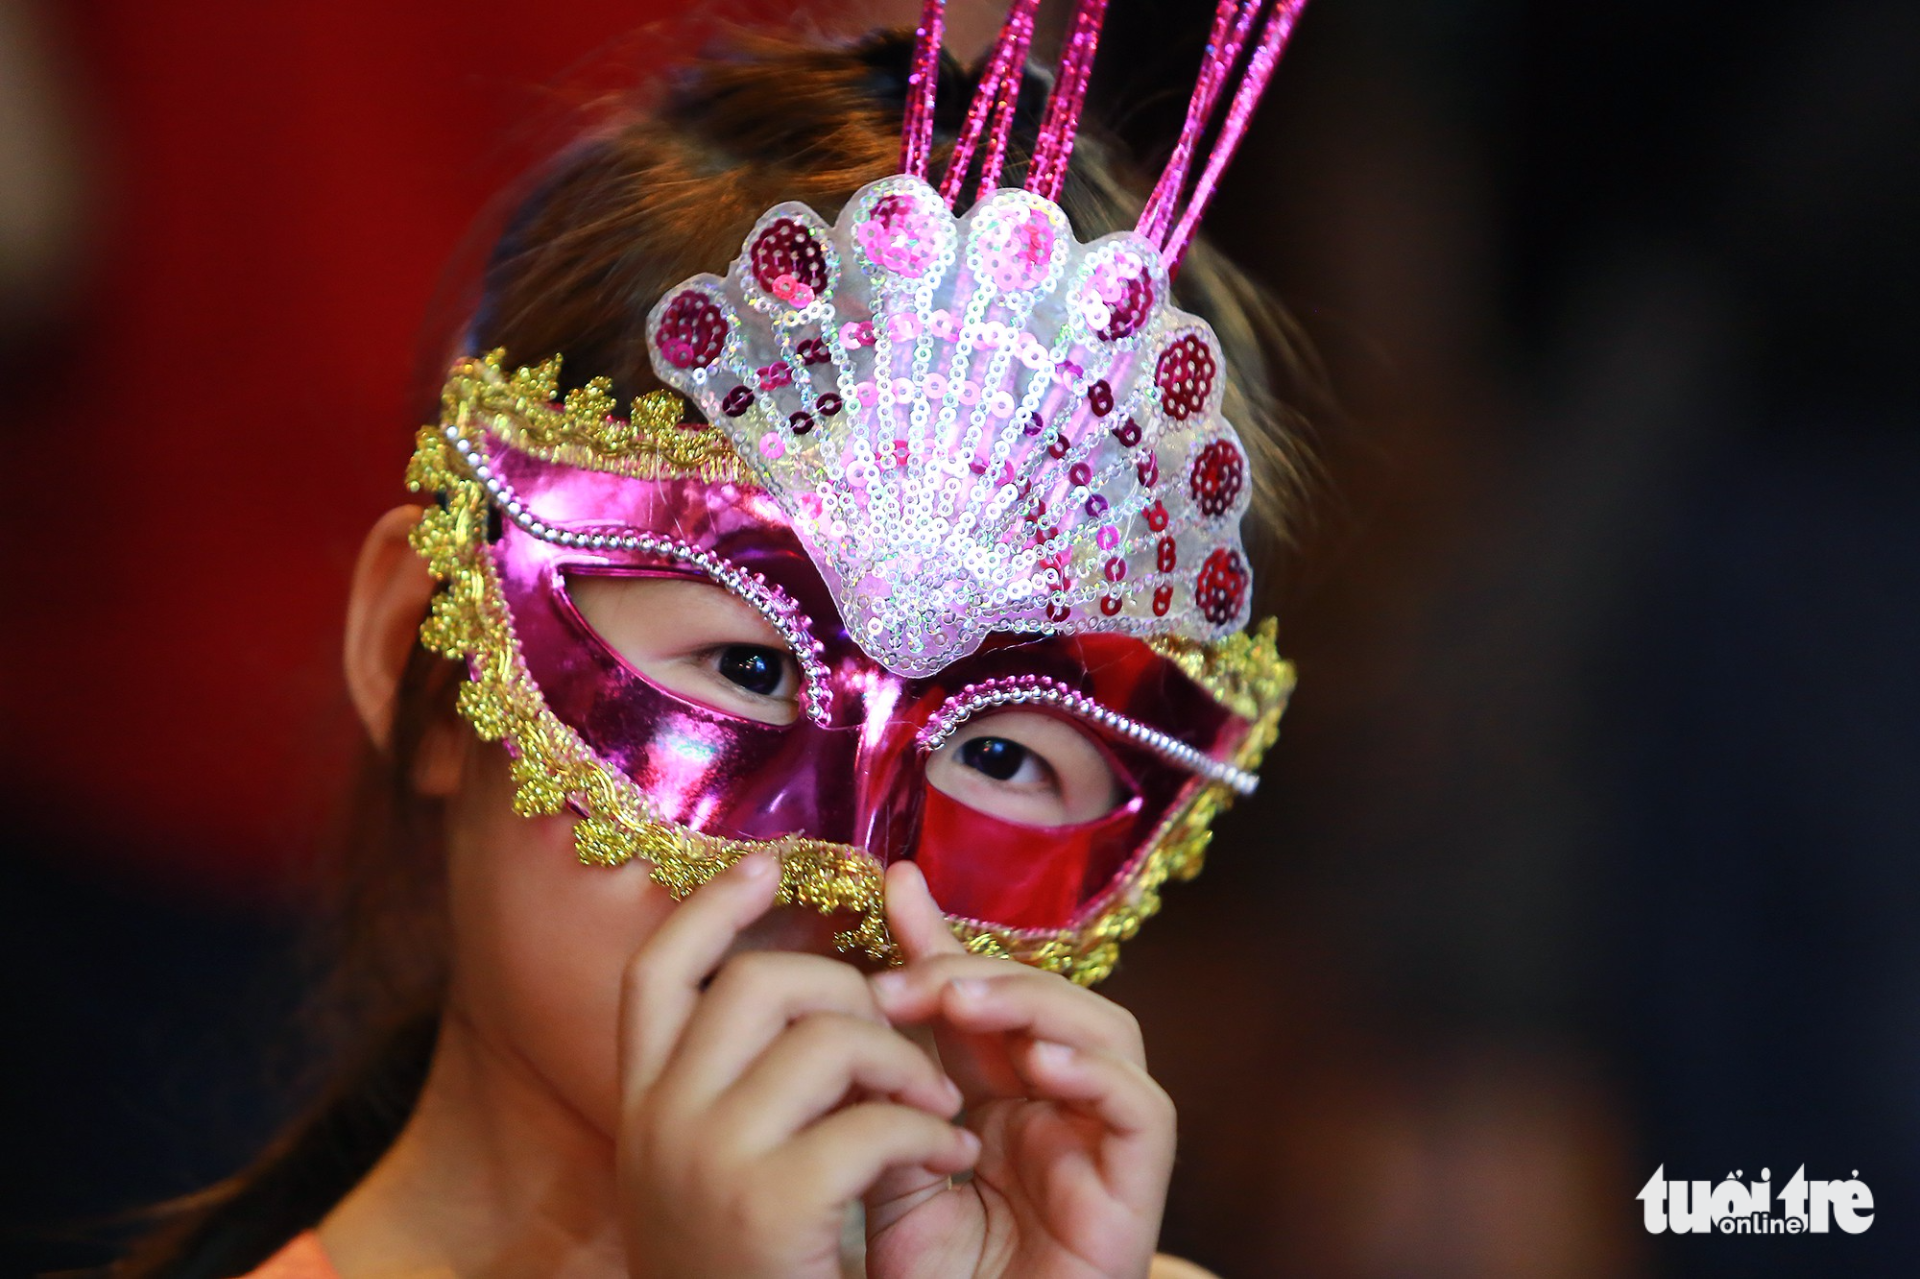 A young girl poses wearing a colorful mask.